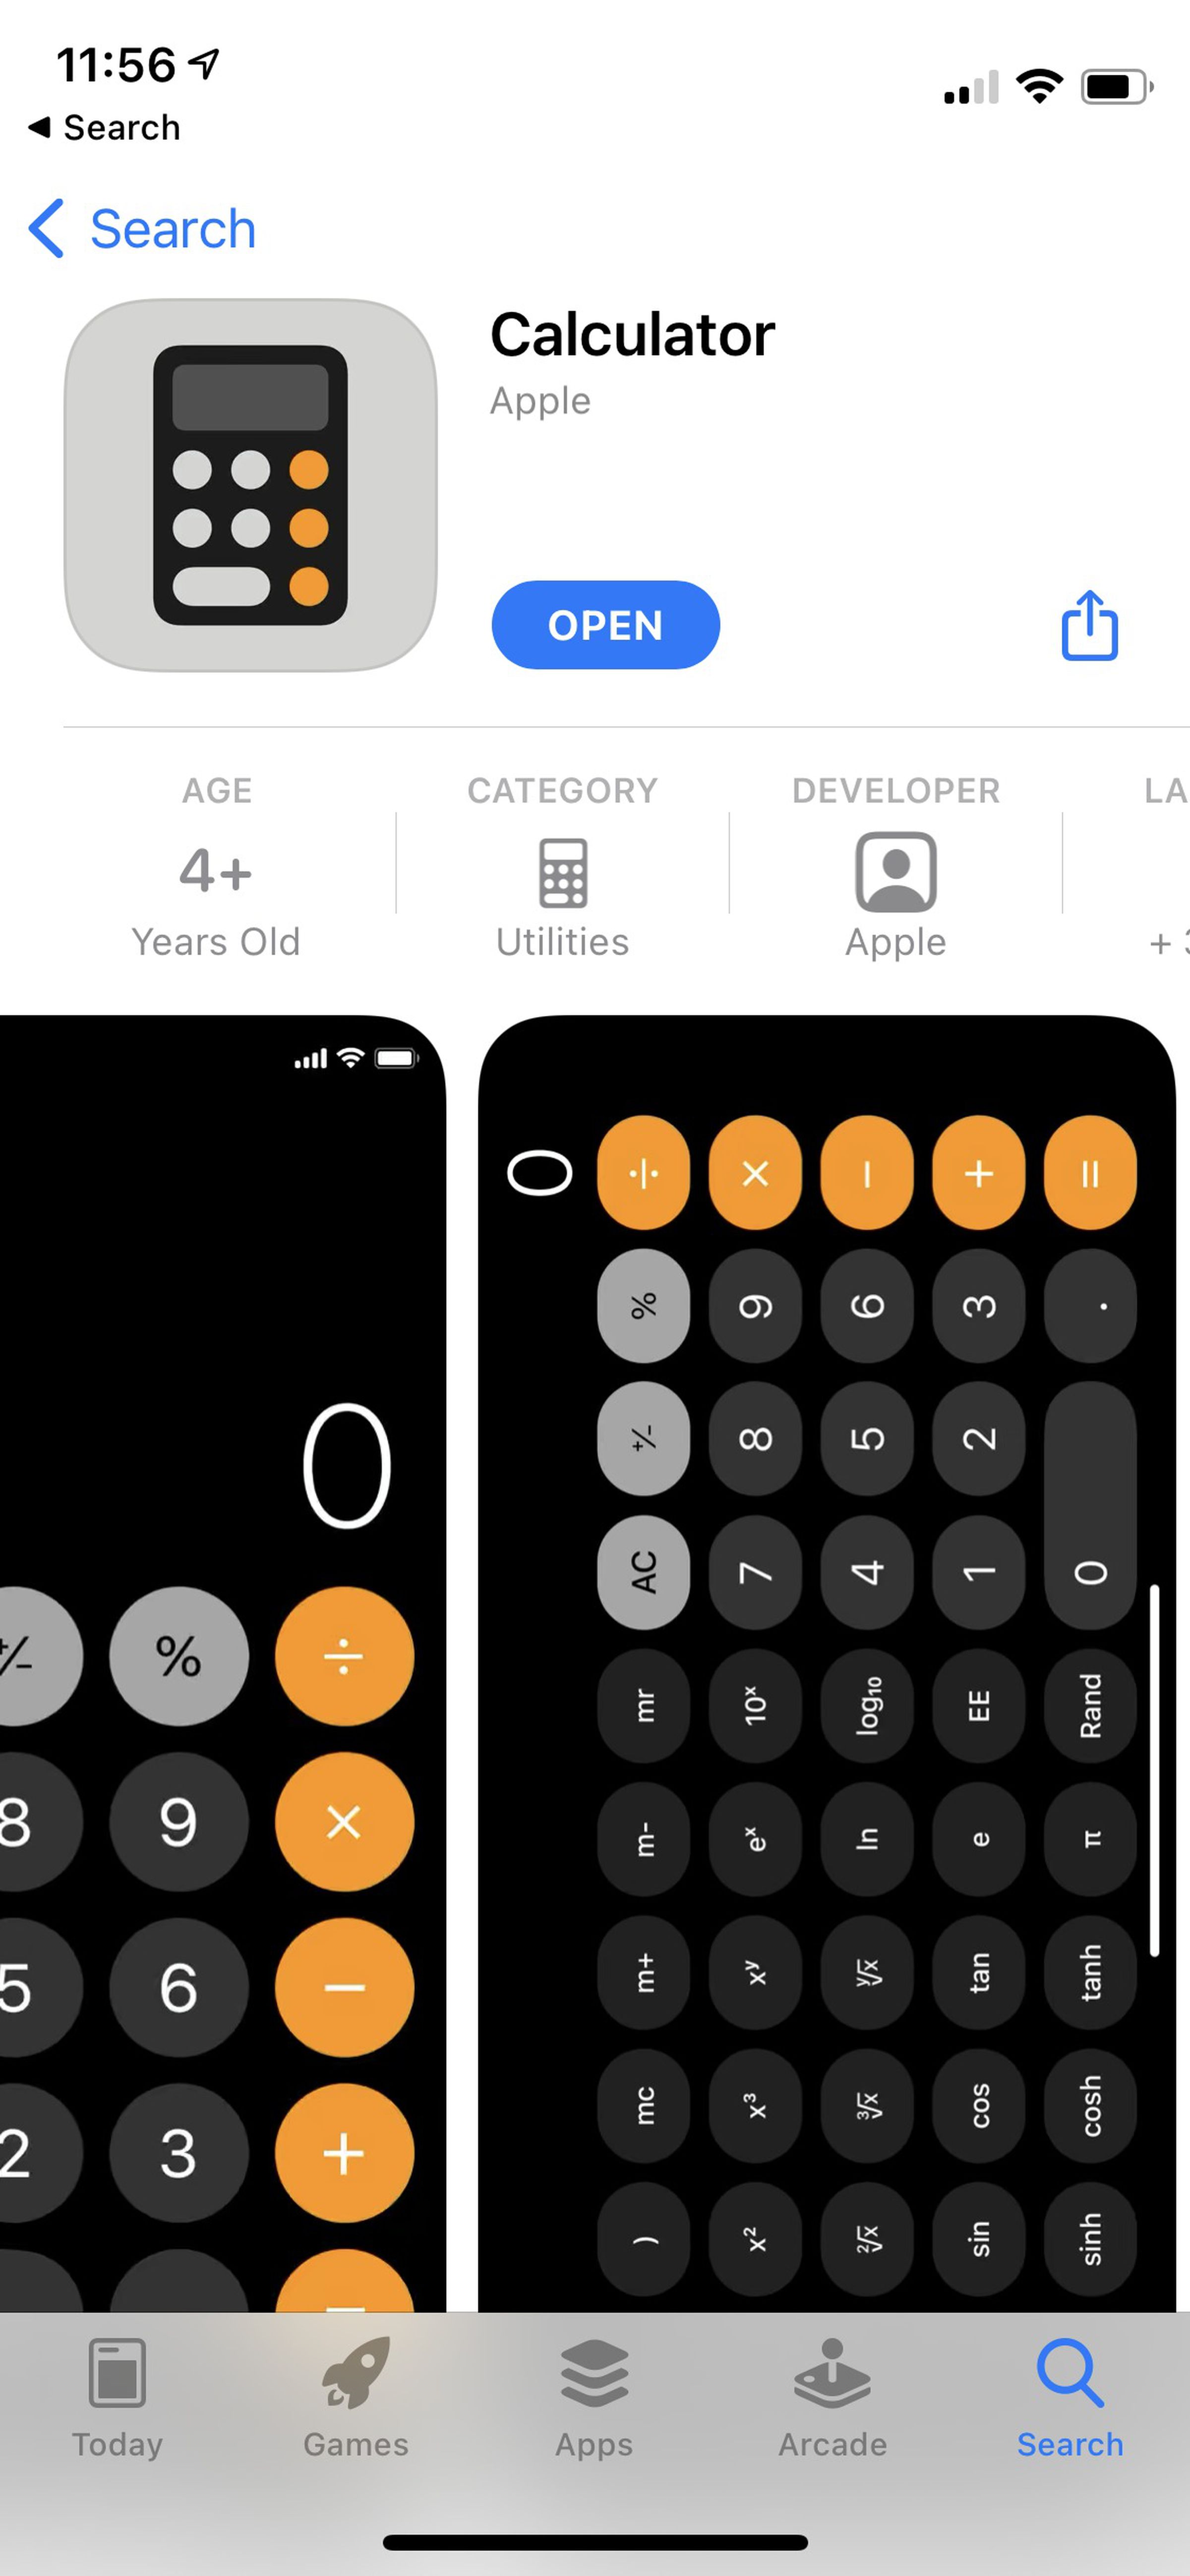 Screenshot of the App Store page for Apple’s Calculator app